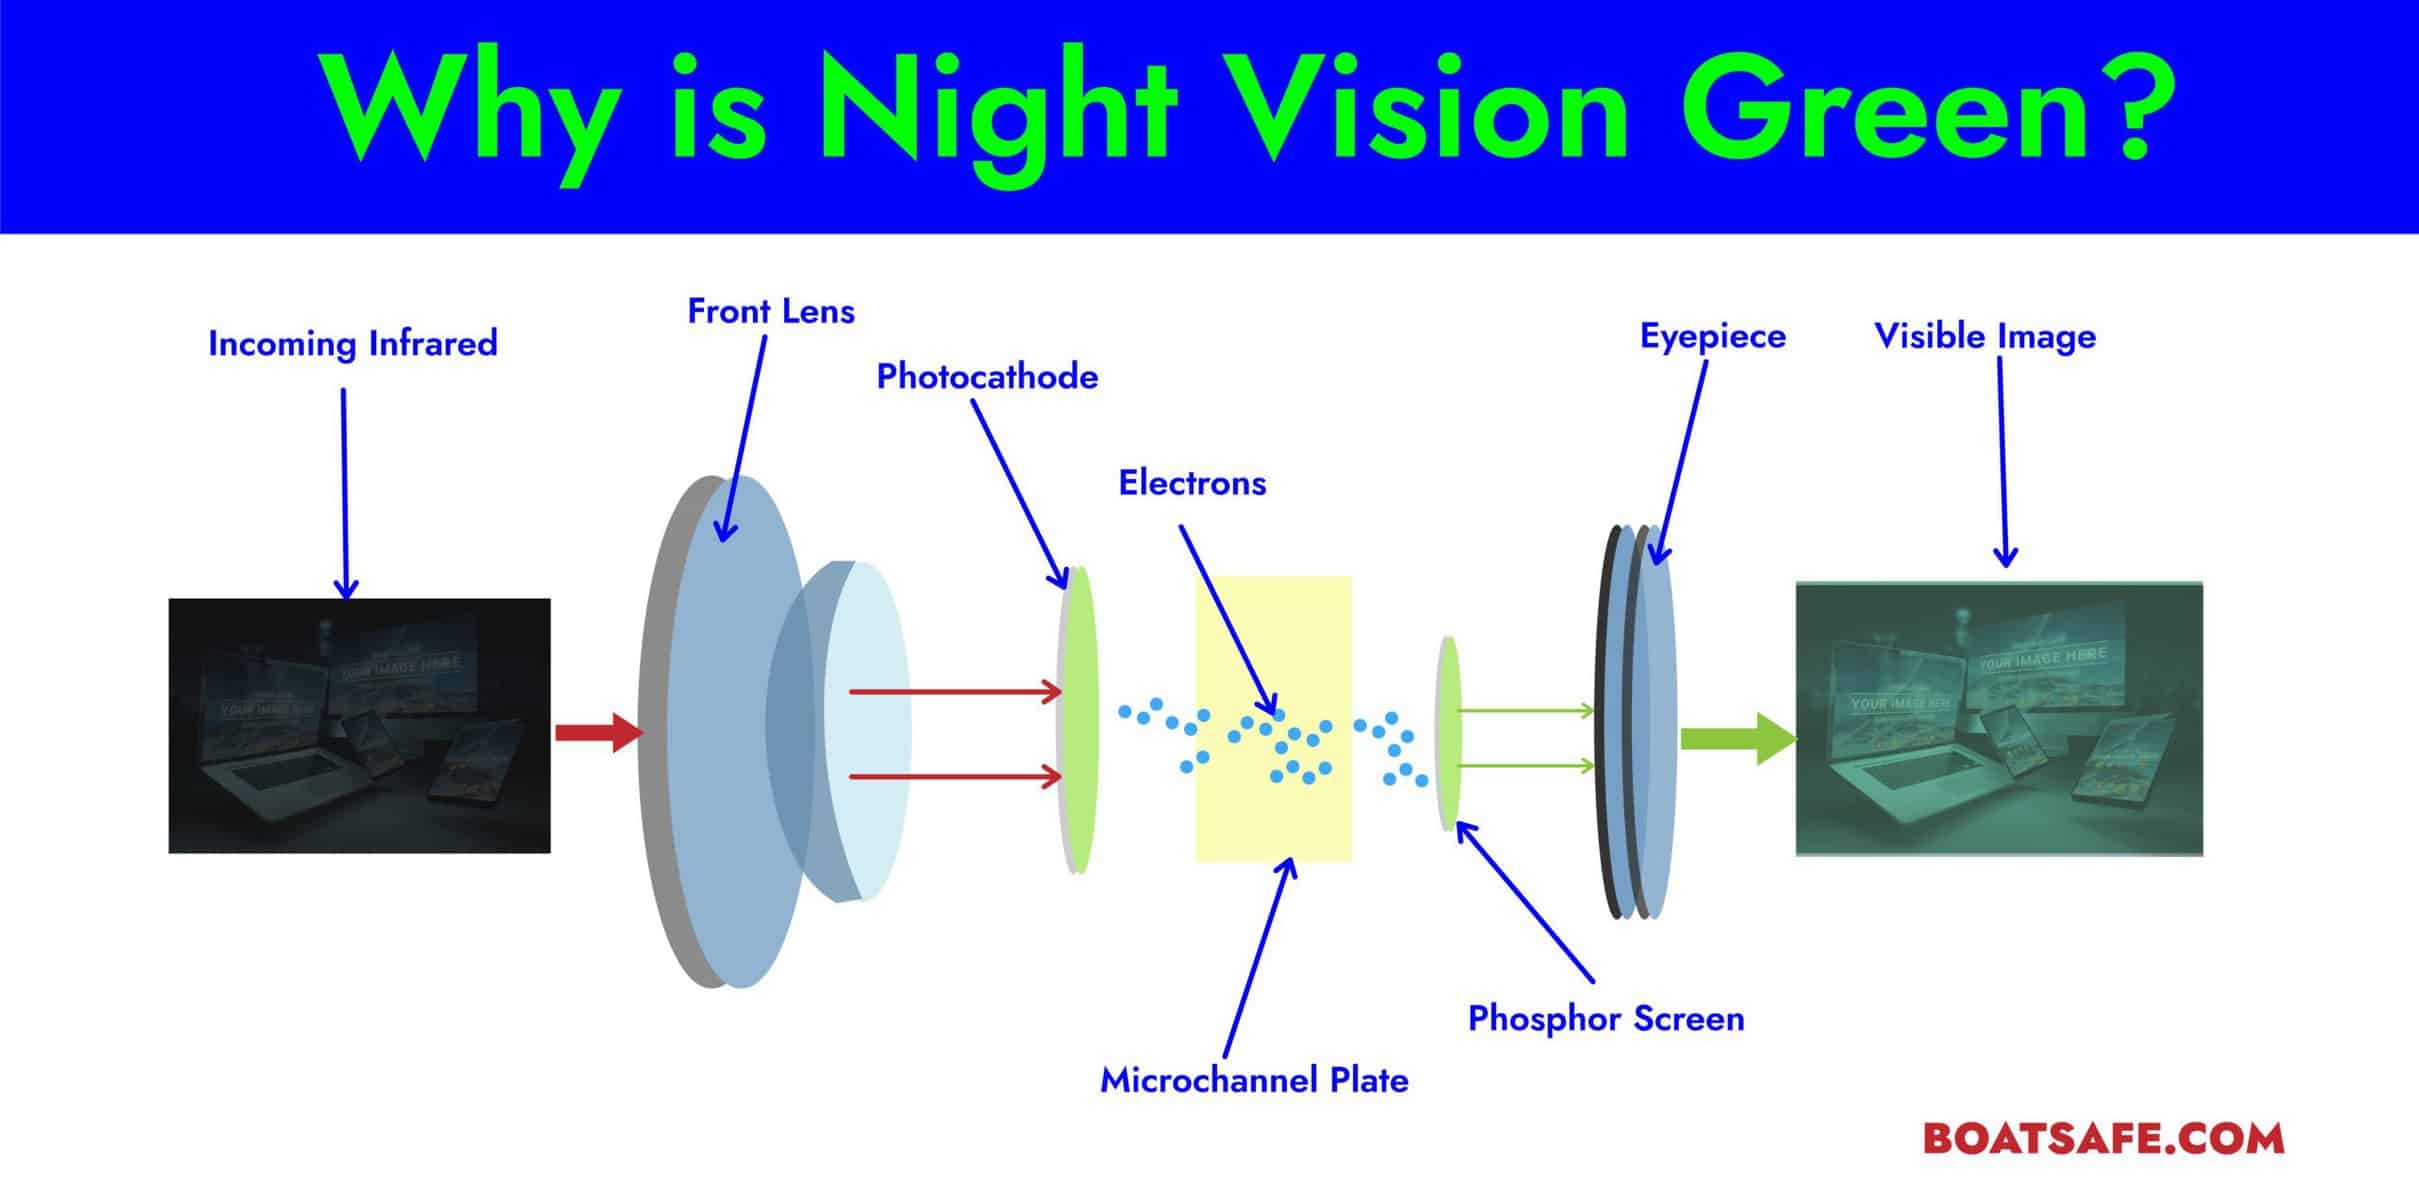 How does night vision work?